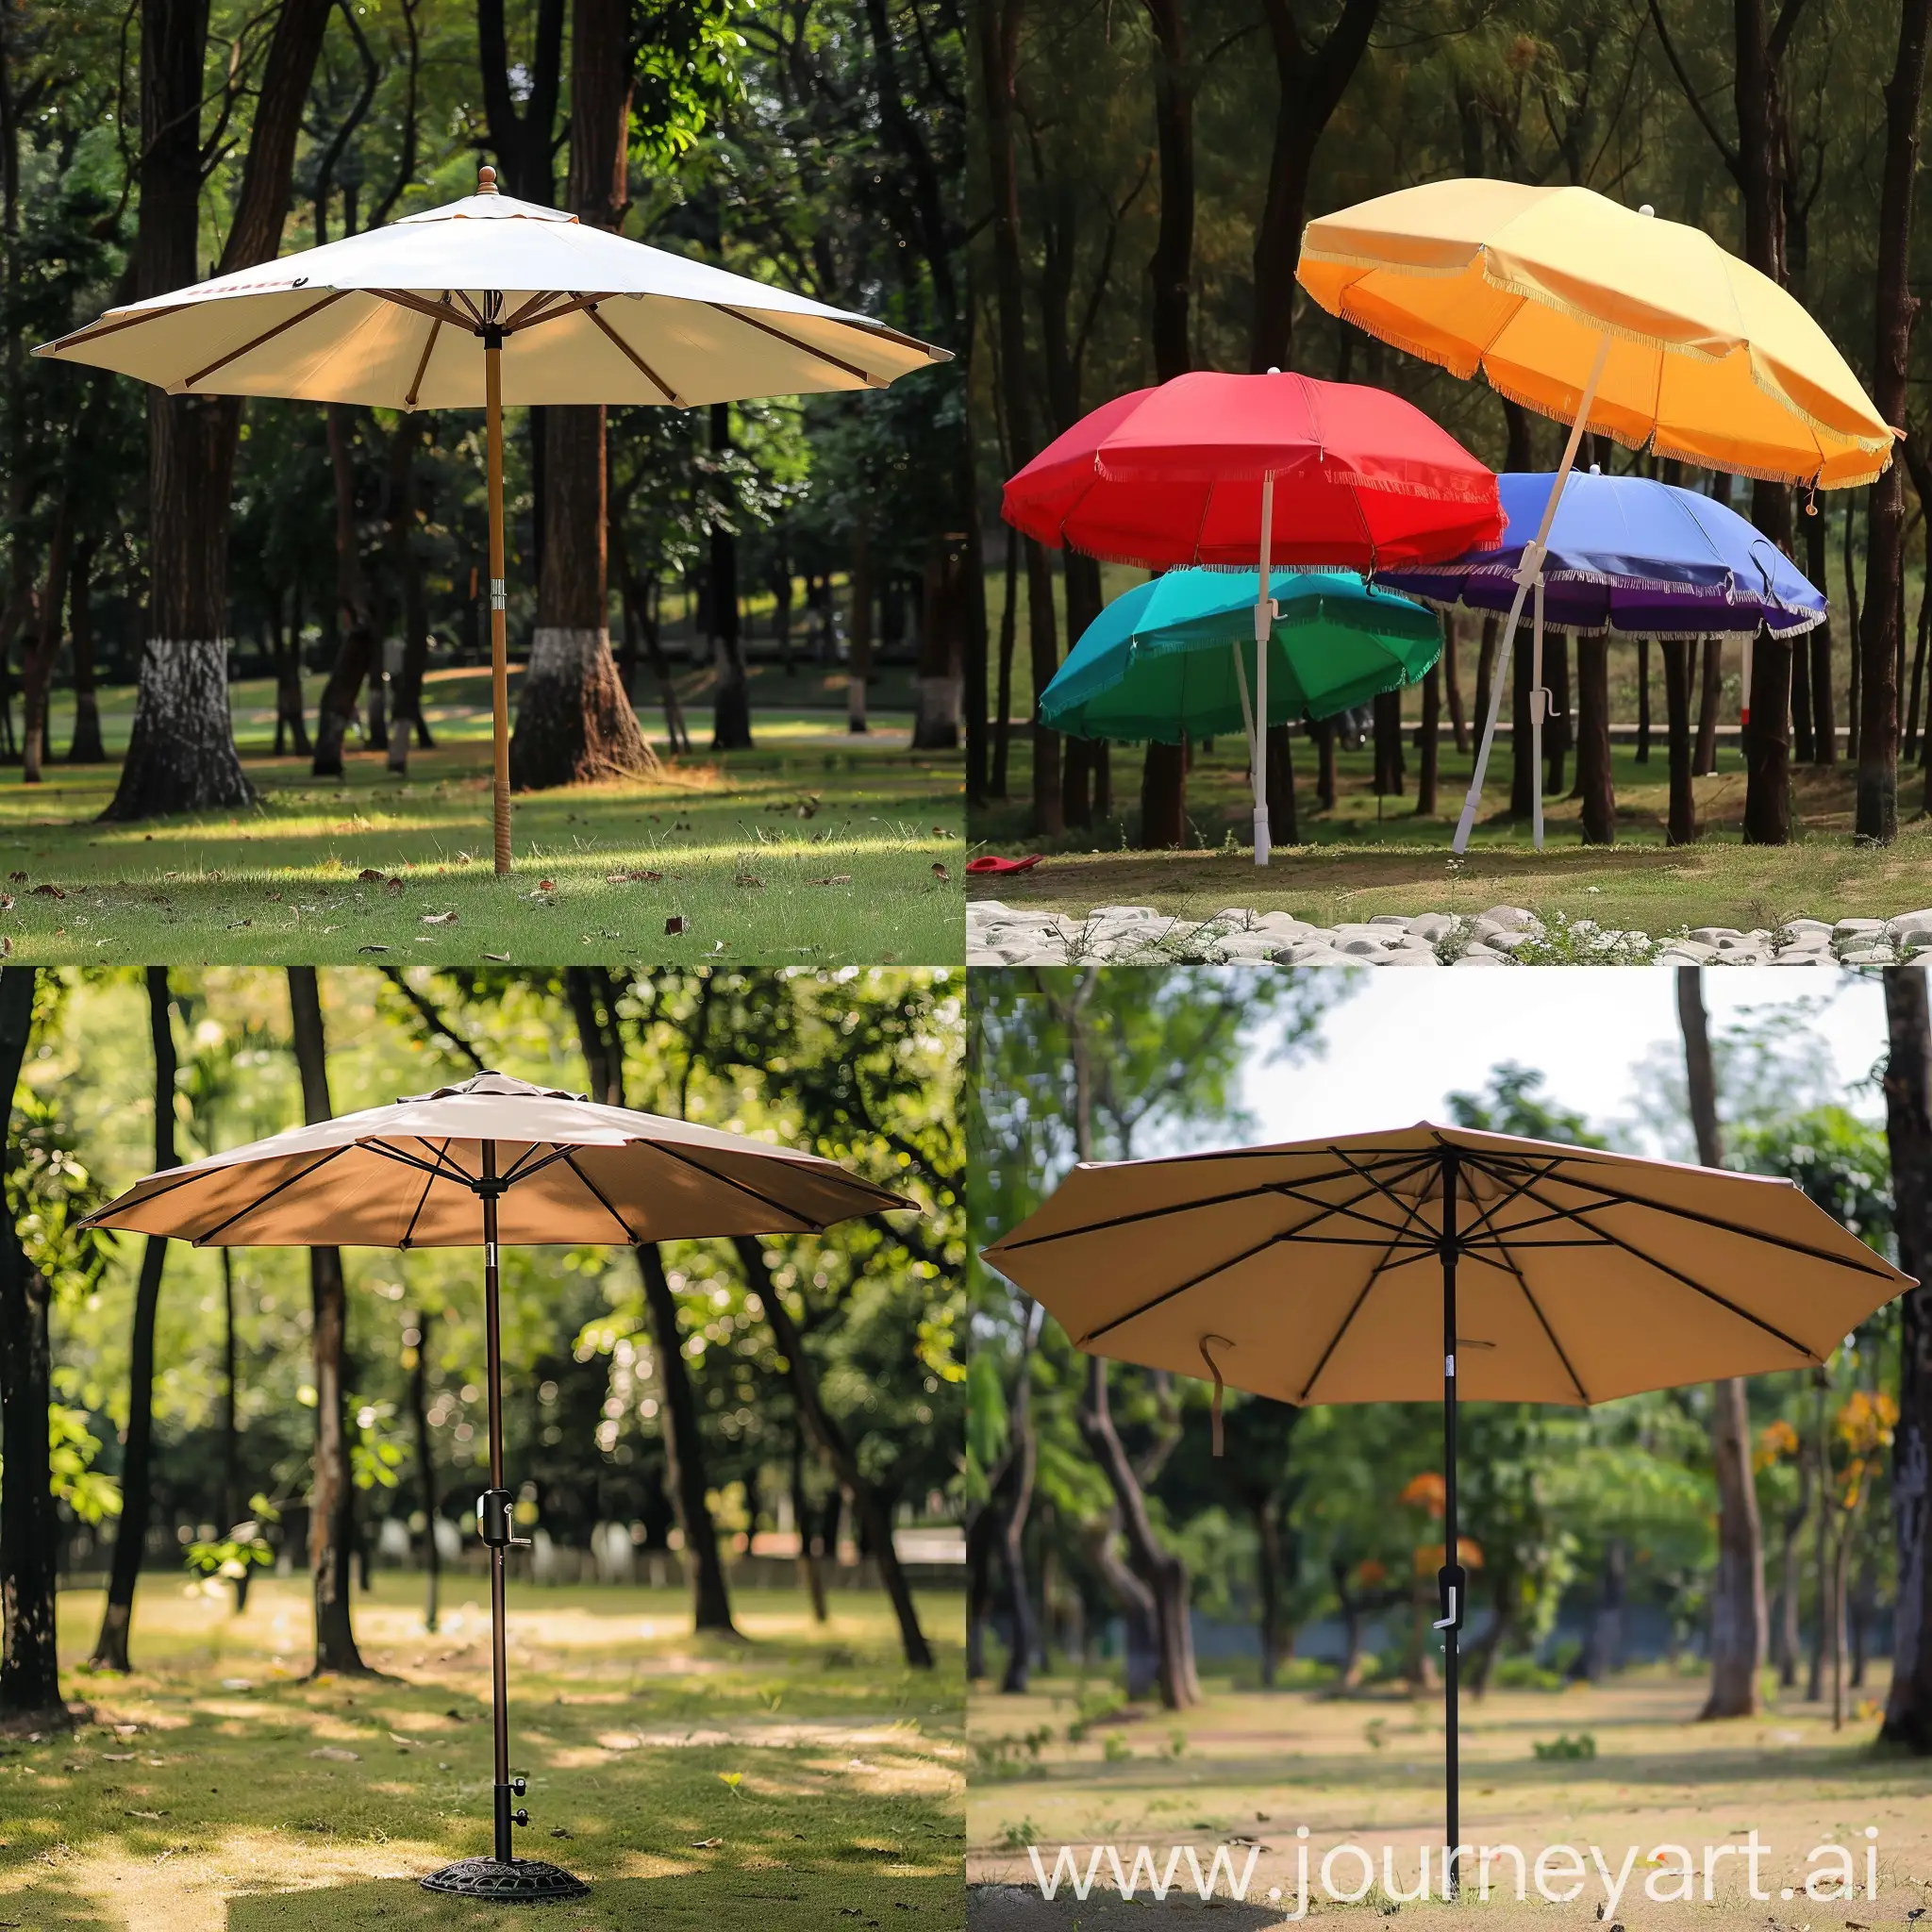 Shopping-with-Umbrella-Enjoying-Leisure-Time-in-the-Park